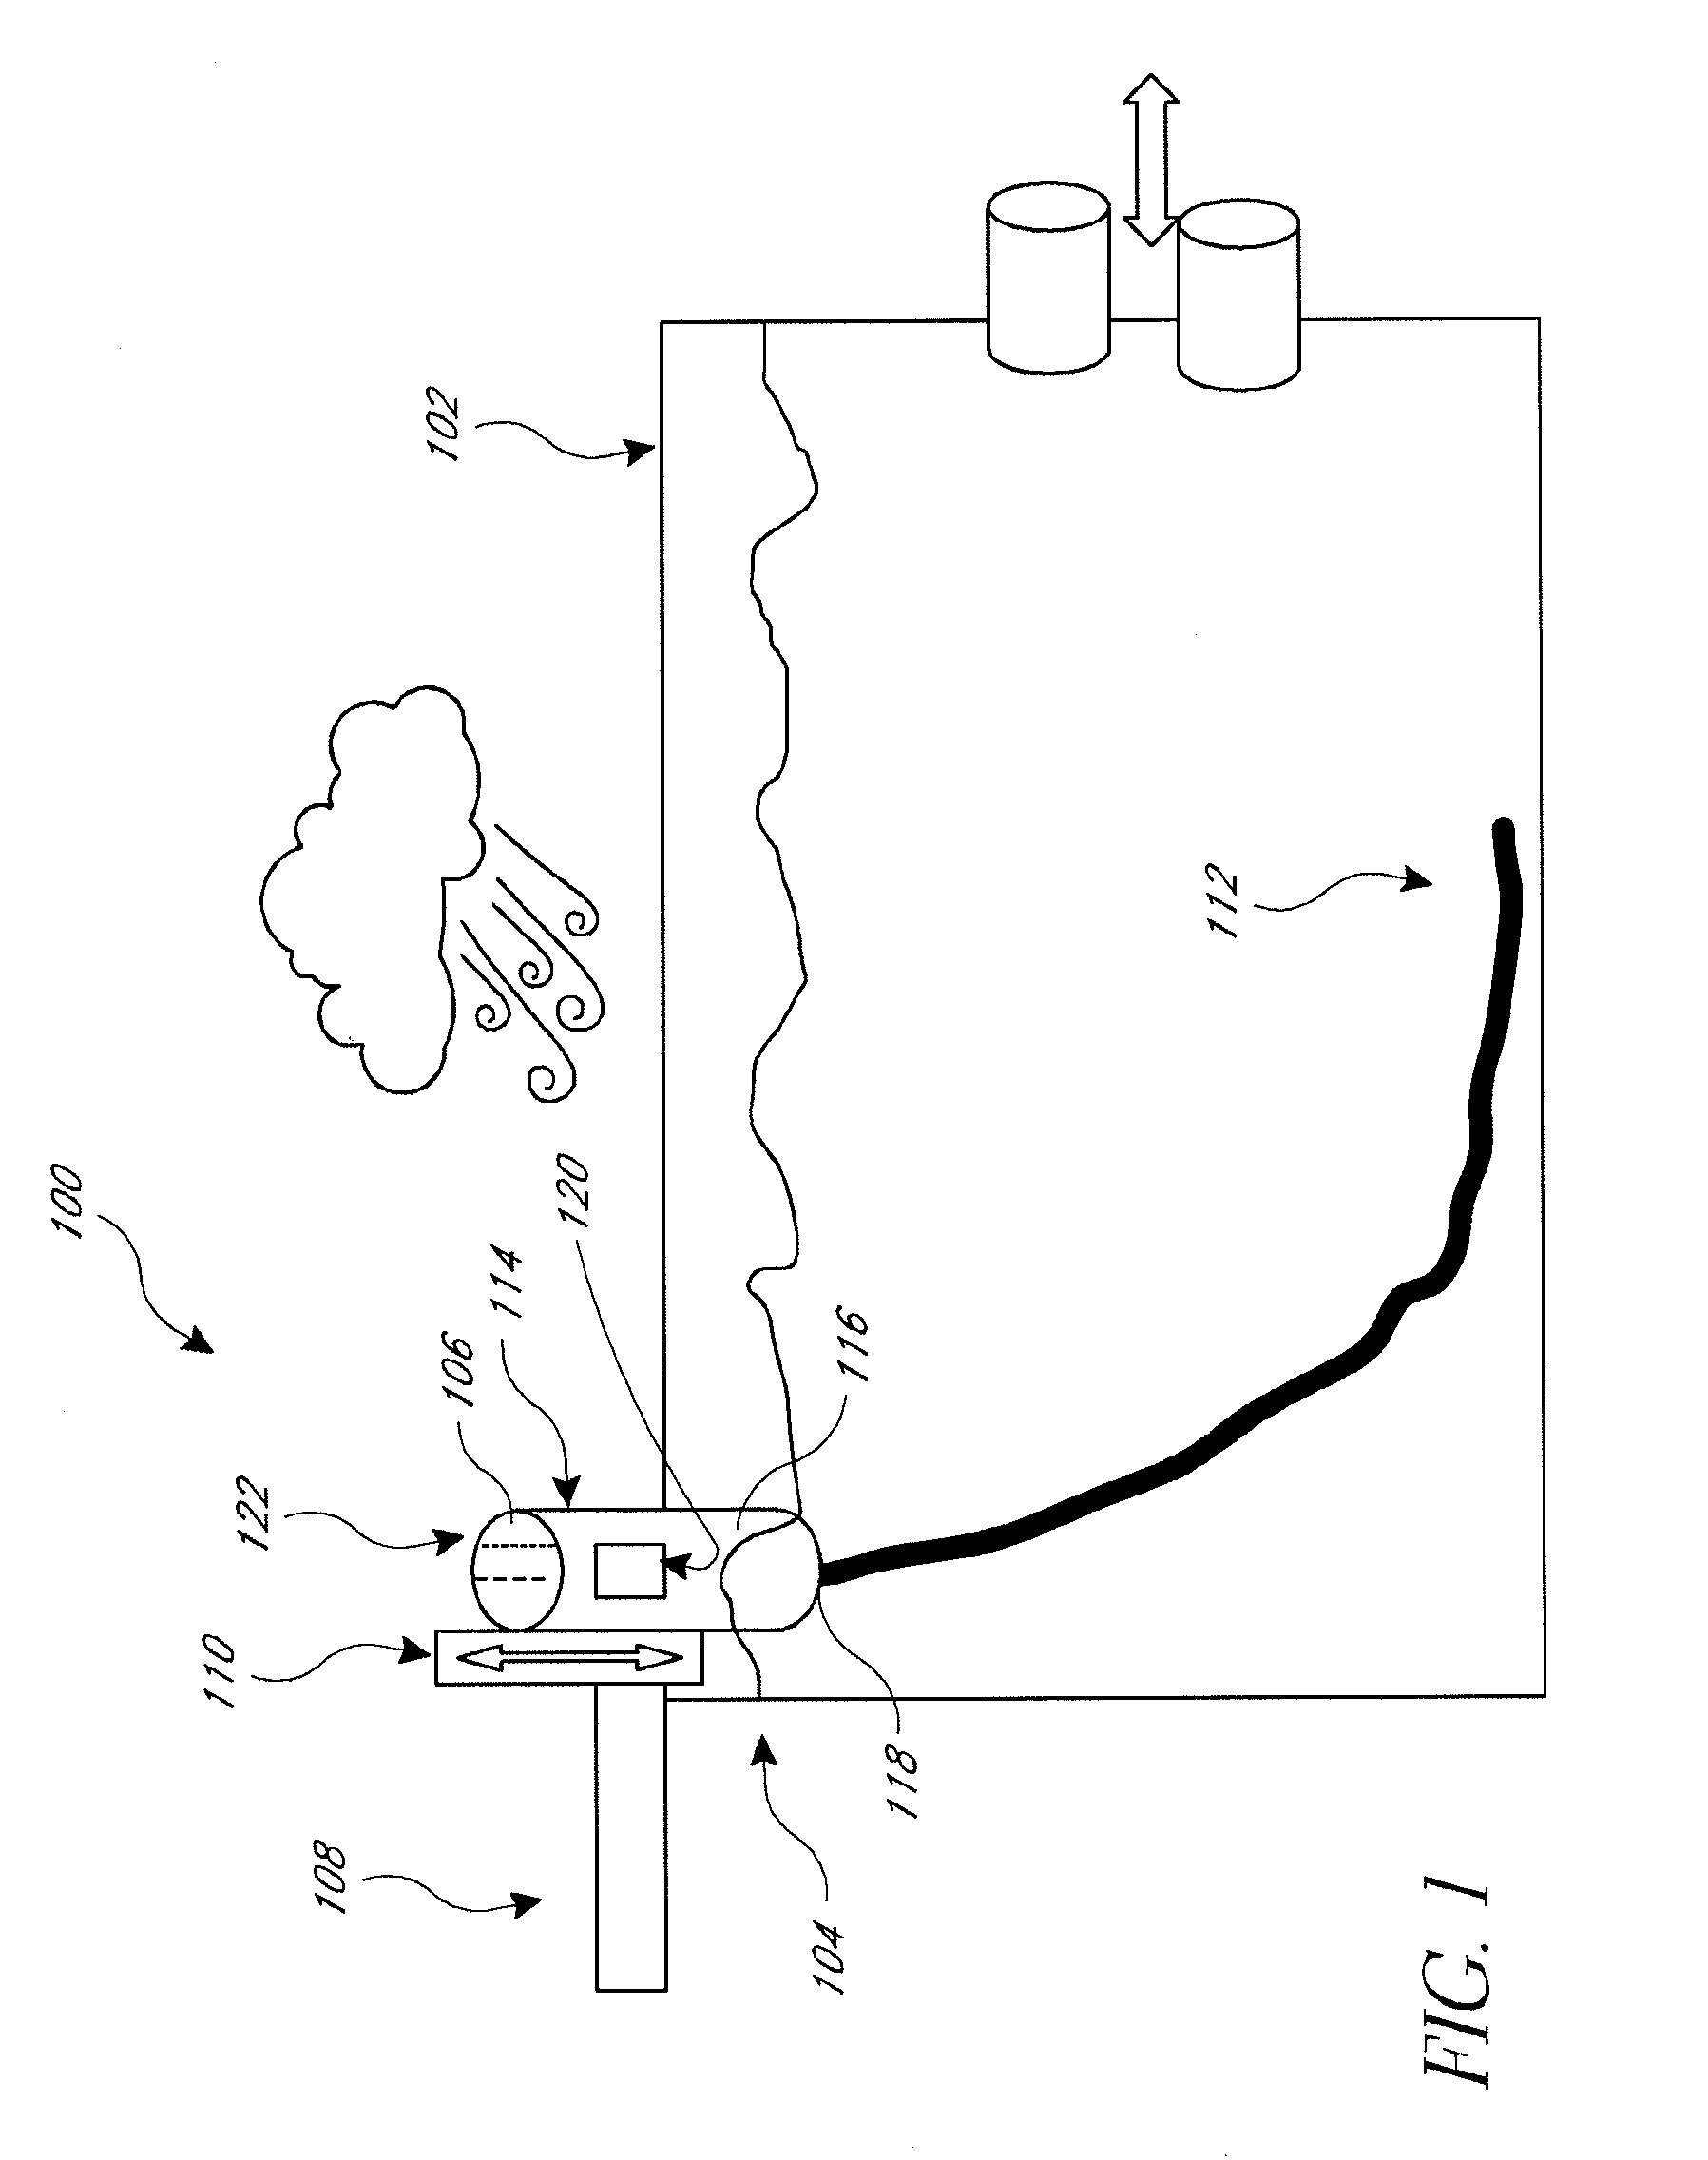 Devices, methods, and algorithms for rapid measurement of mean surface level change of liquids in containers